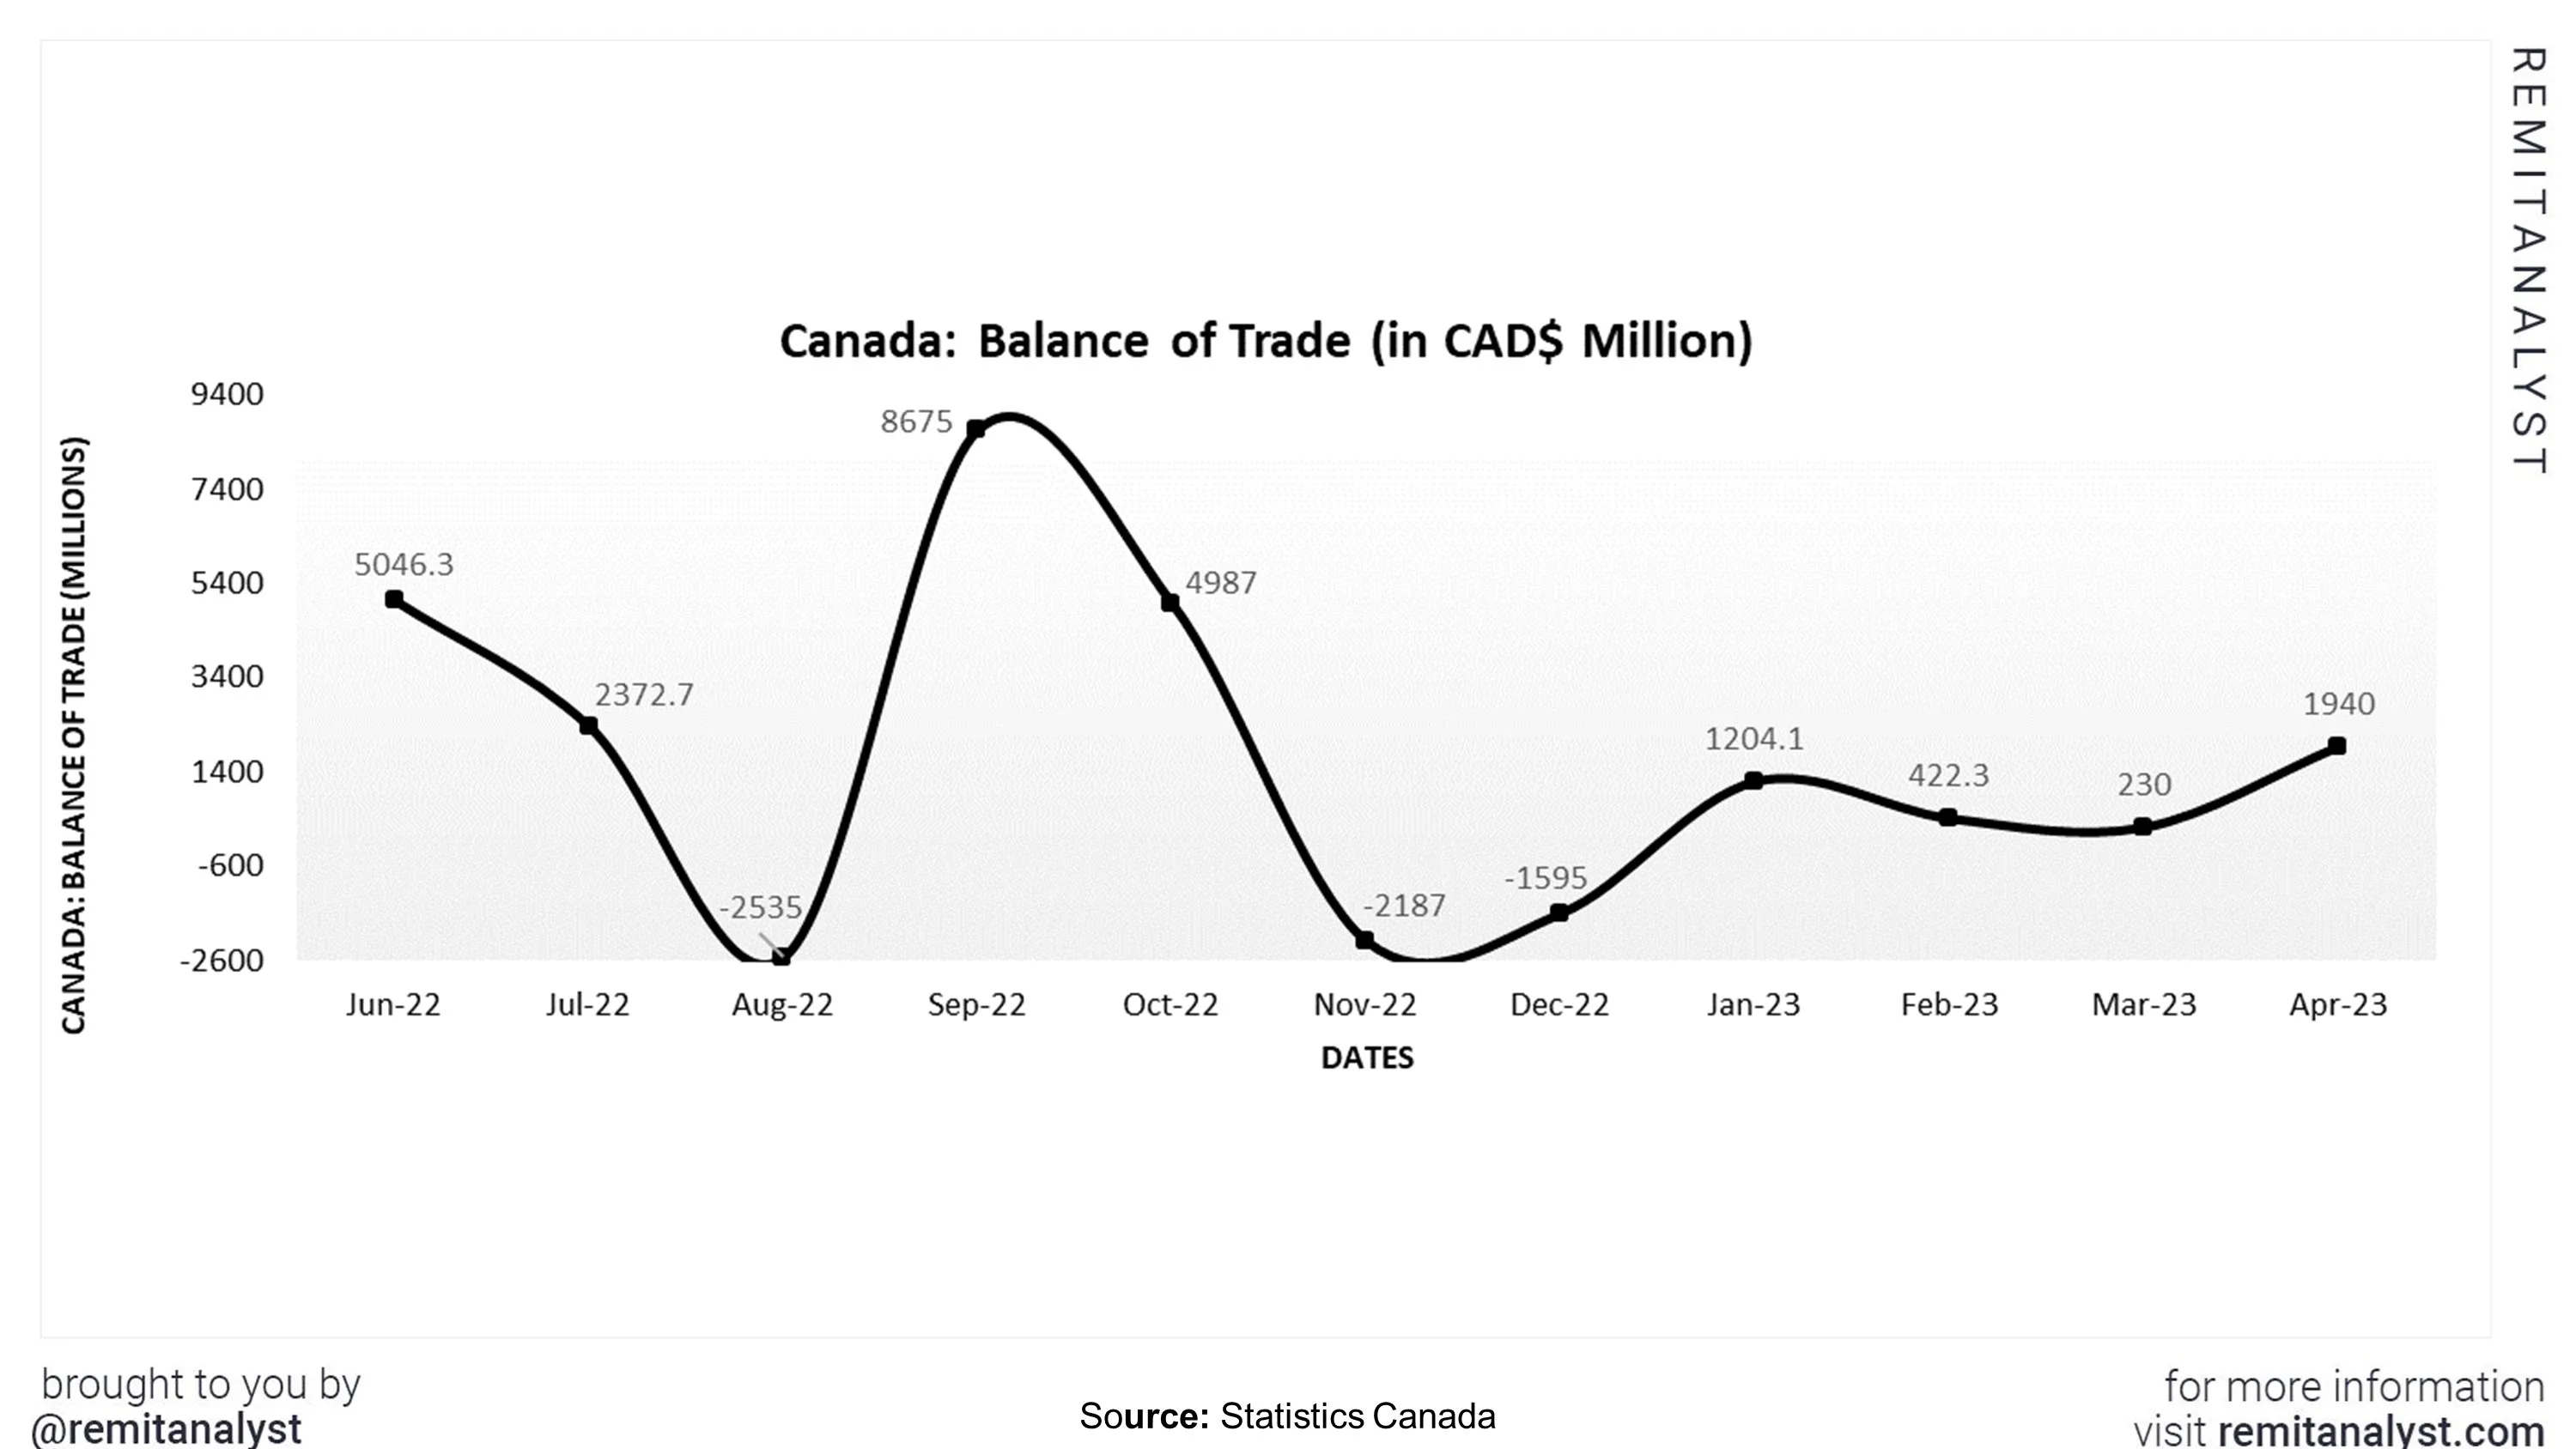 balance-of-trade-canada-from-jun-2022-to-apr-2022